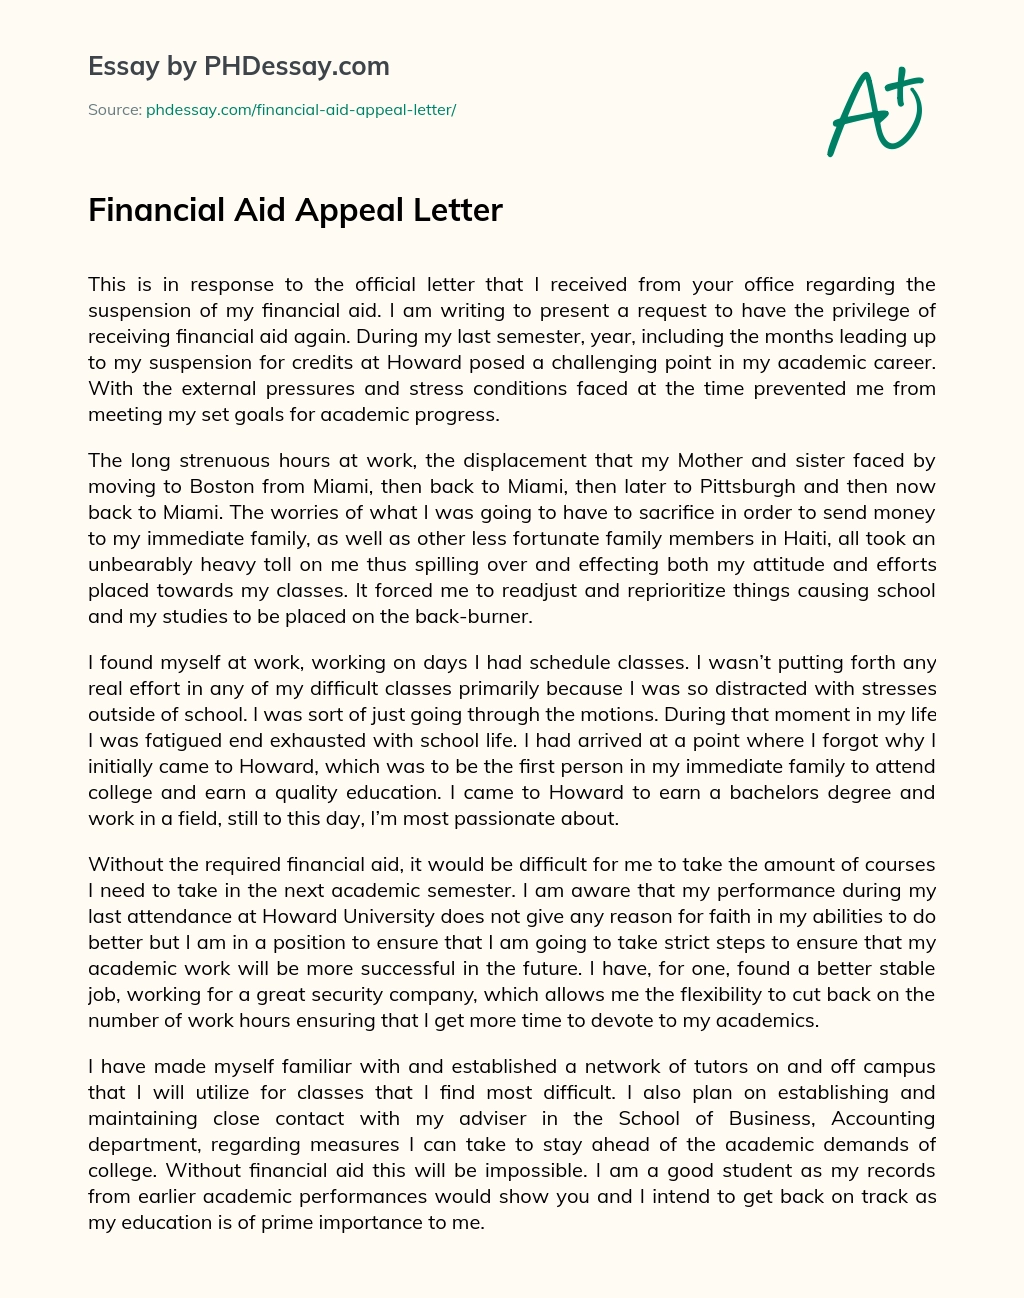 Financial Aid Appeal Letter - PHDessay.com Intended For Financial Aid Appeal Letter Template